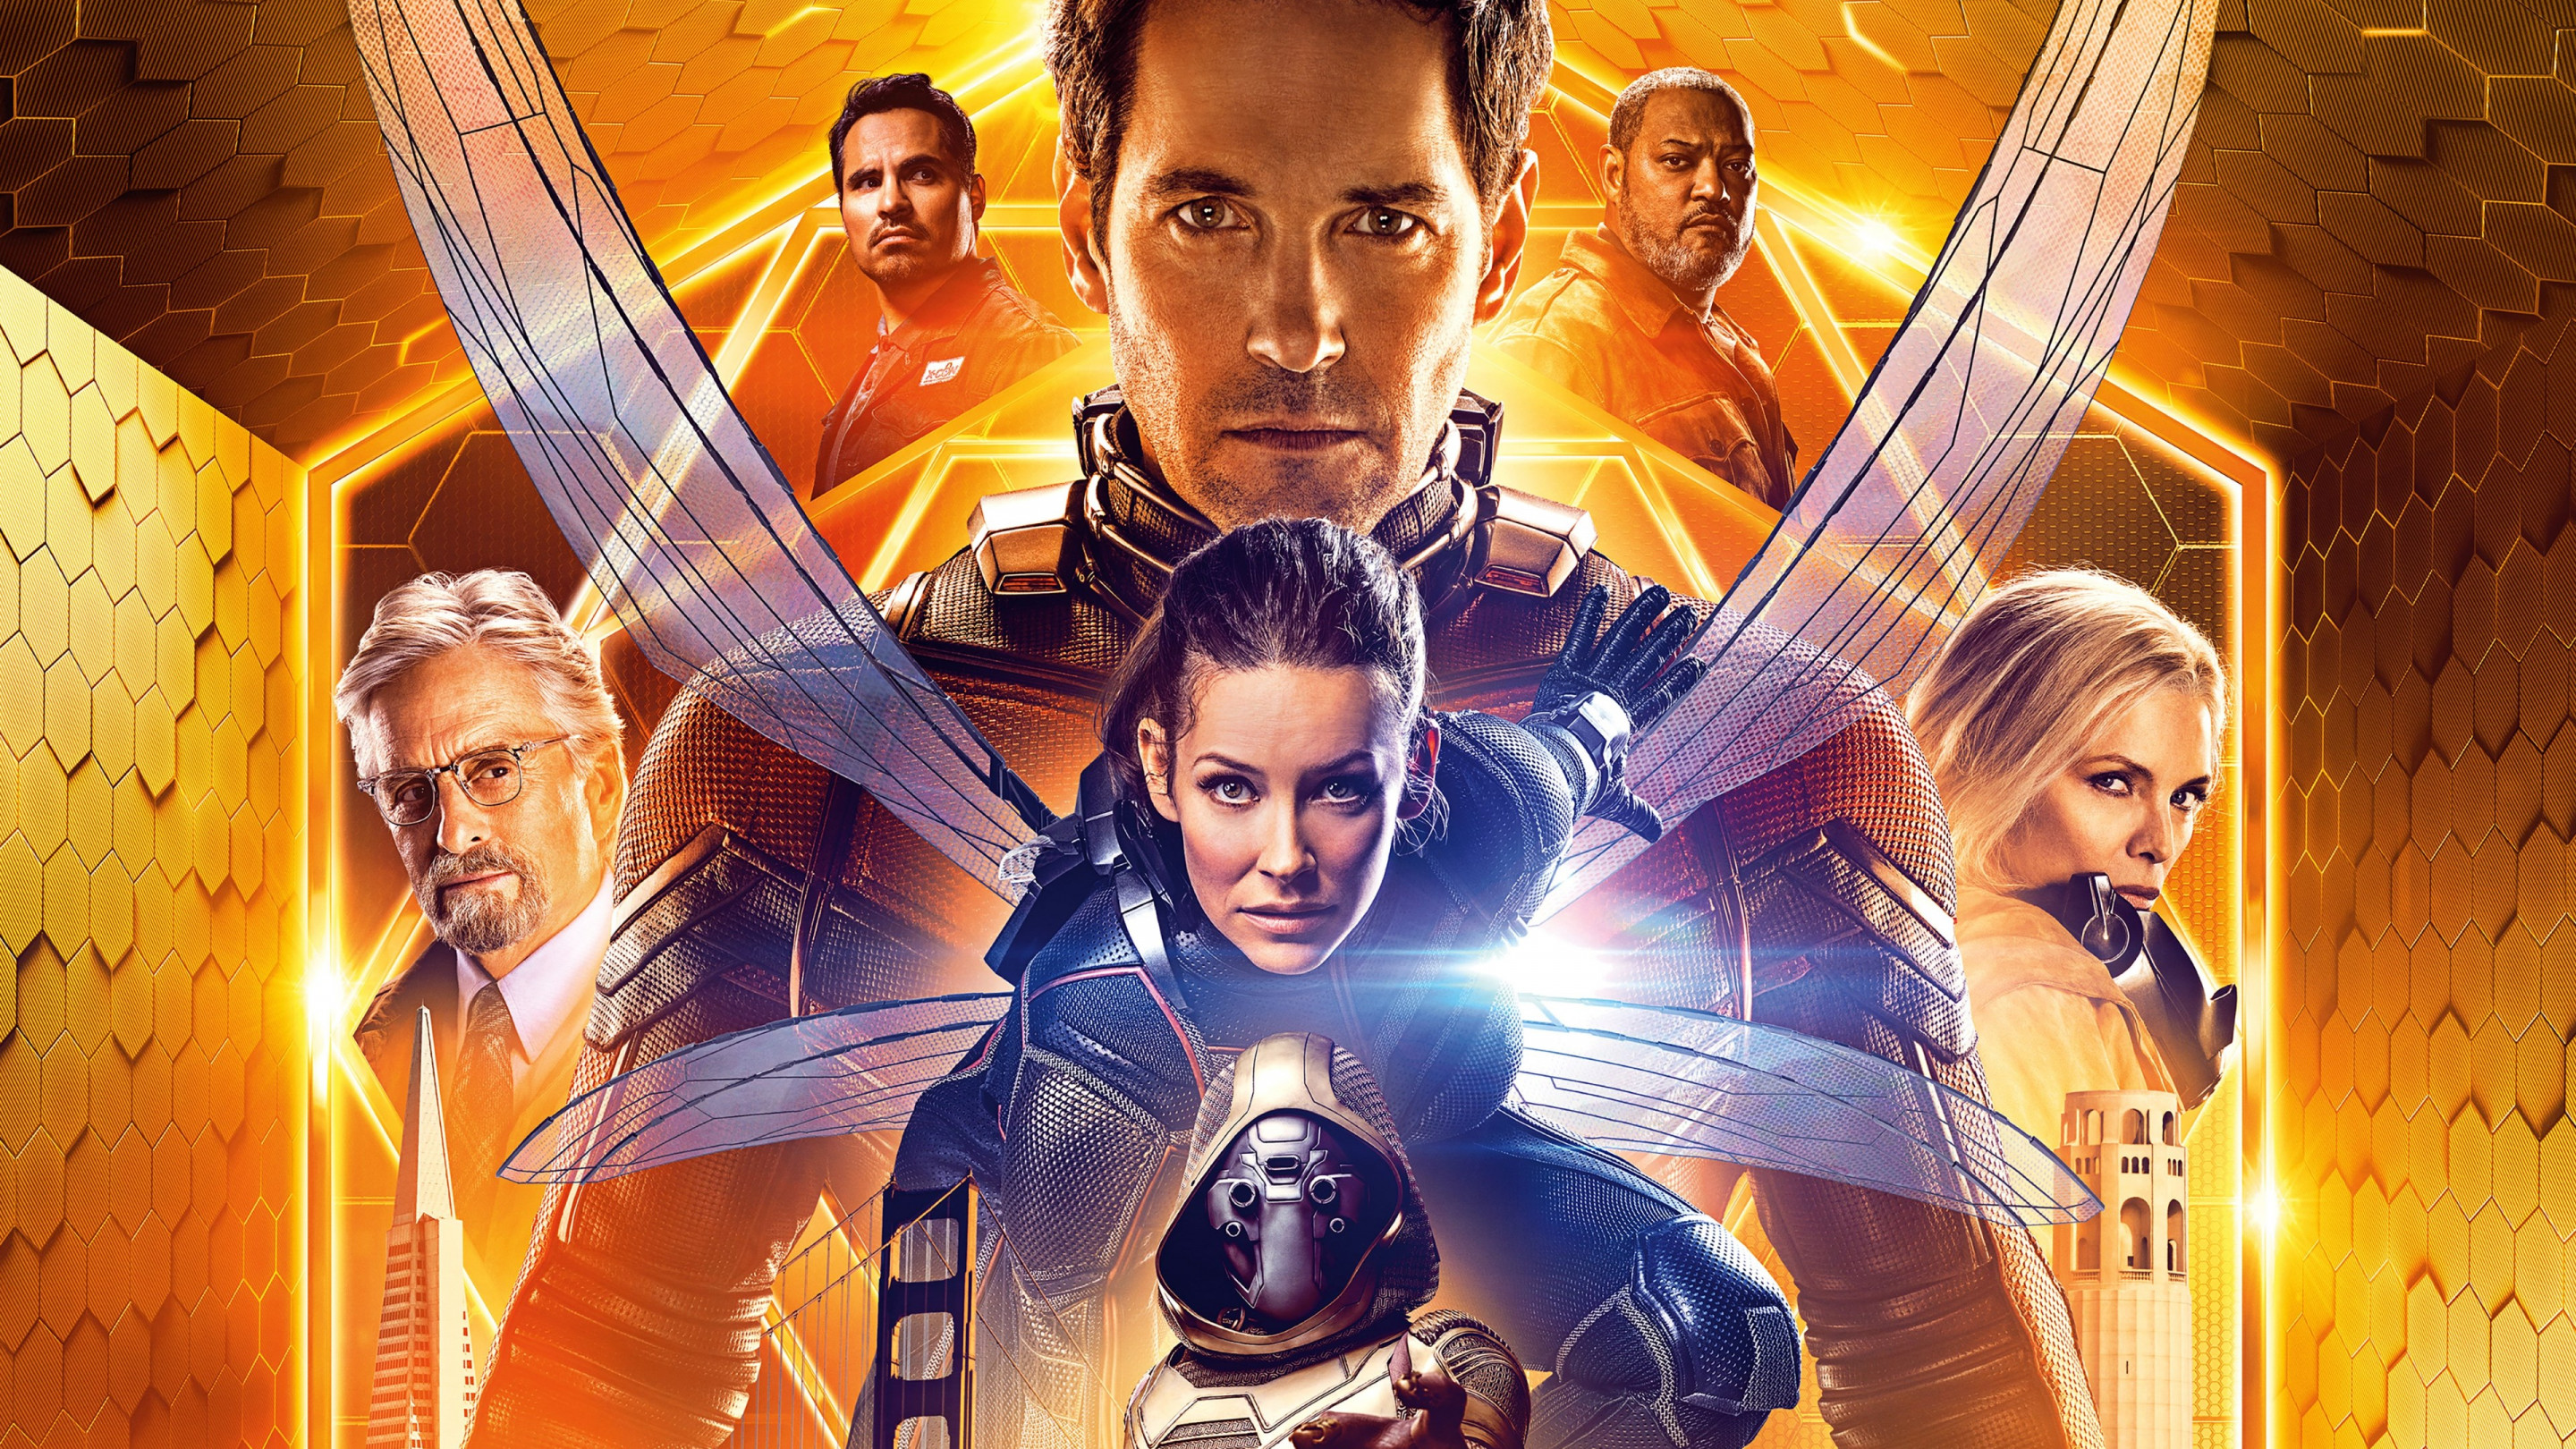 Ant Man and the Wasp poster wallpaper 2880x1620